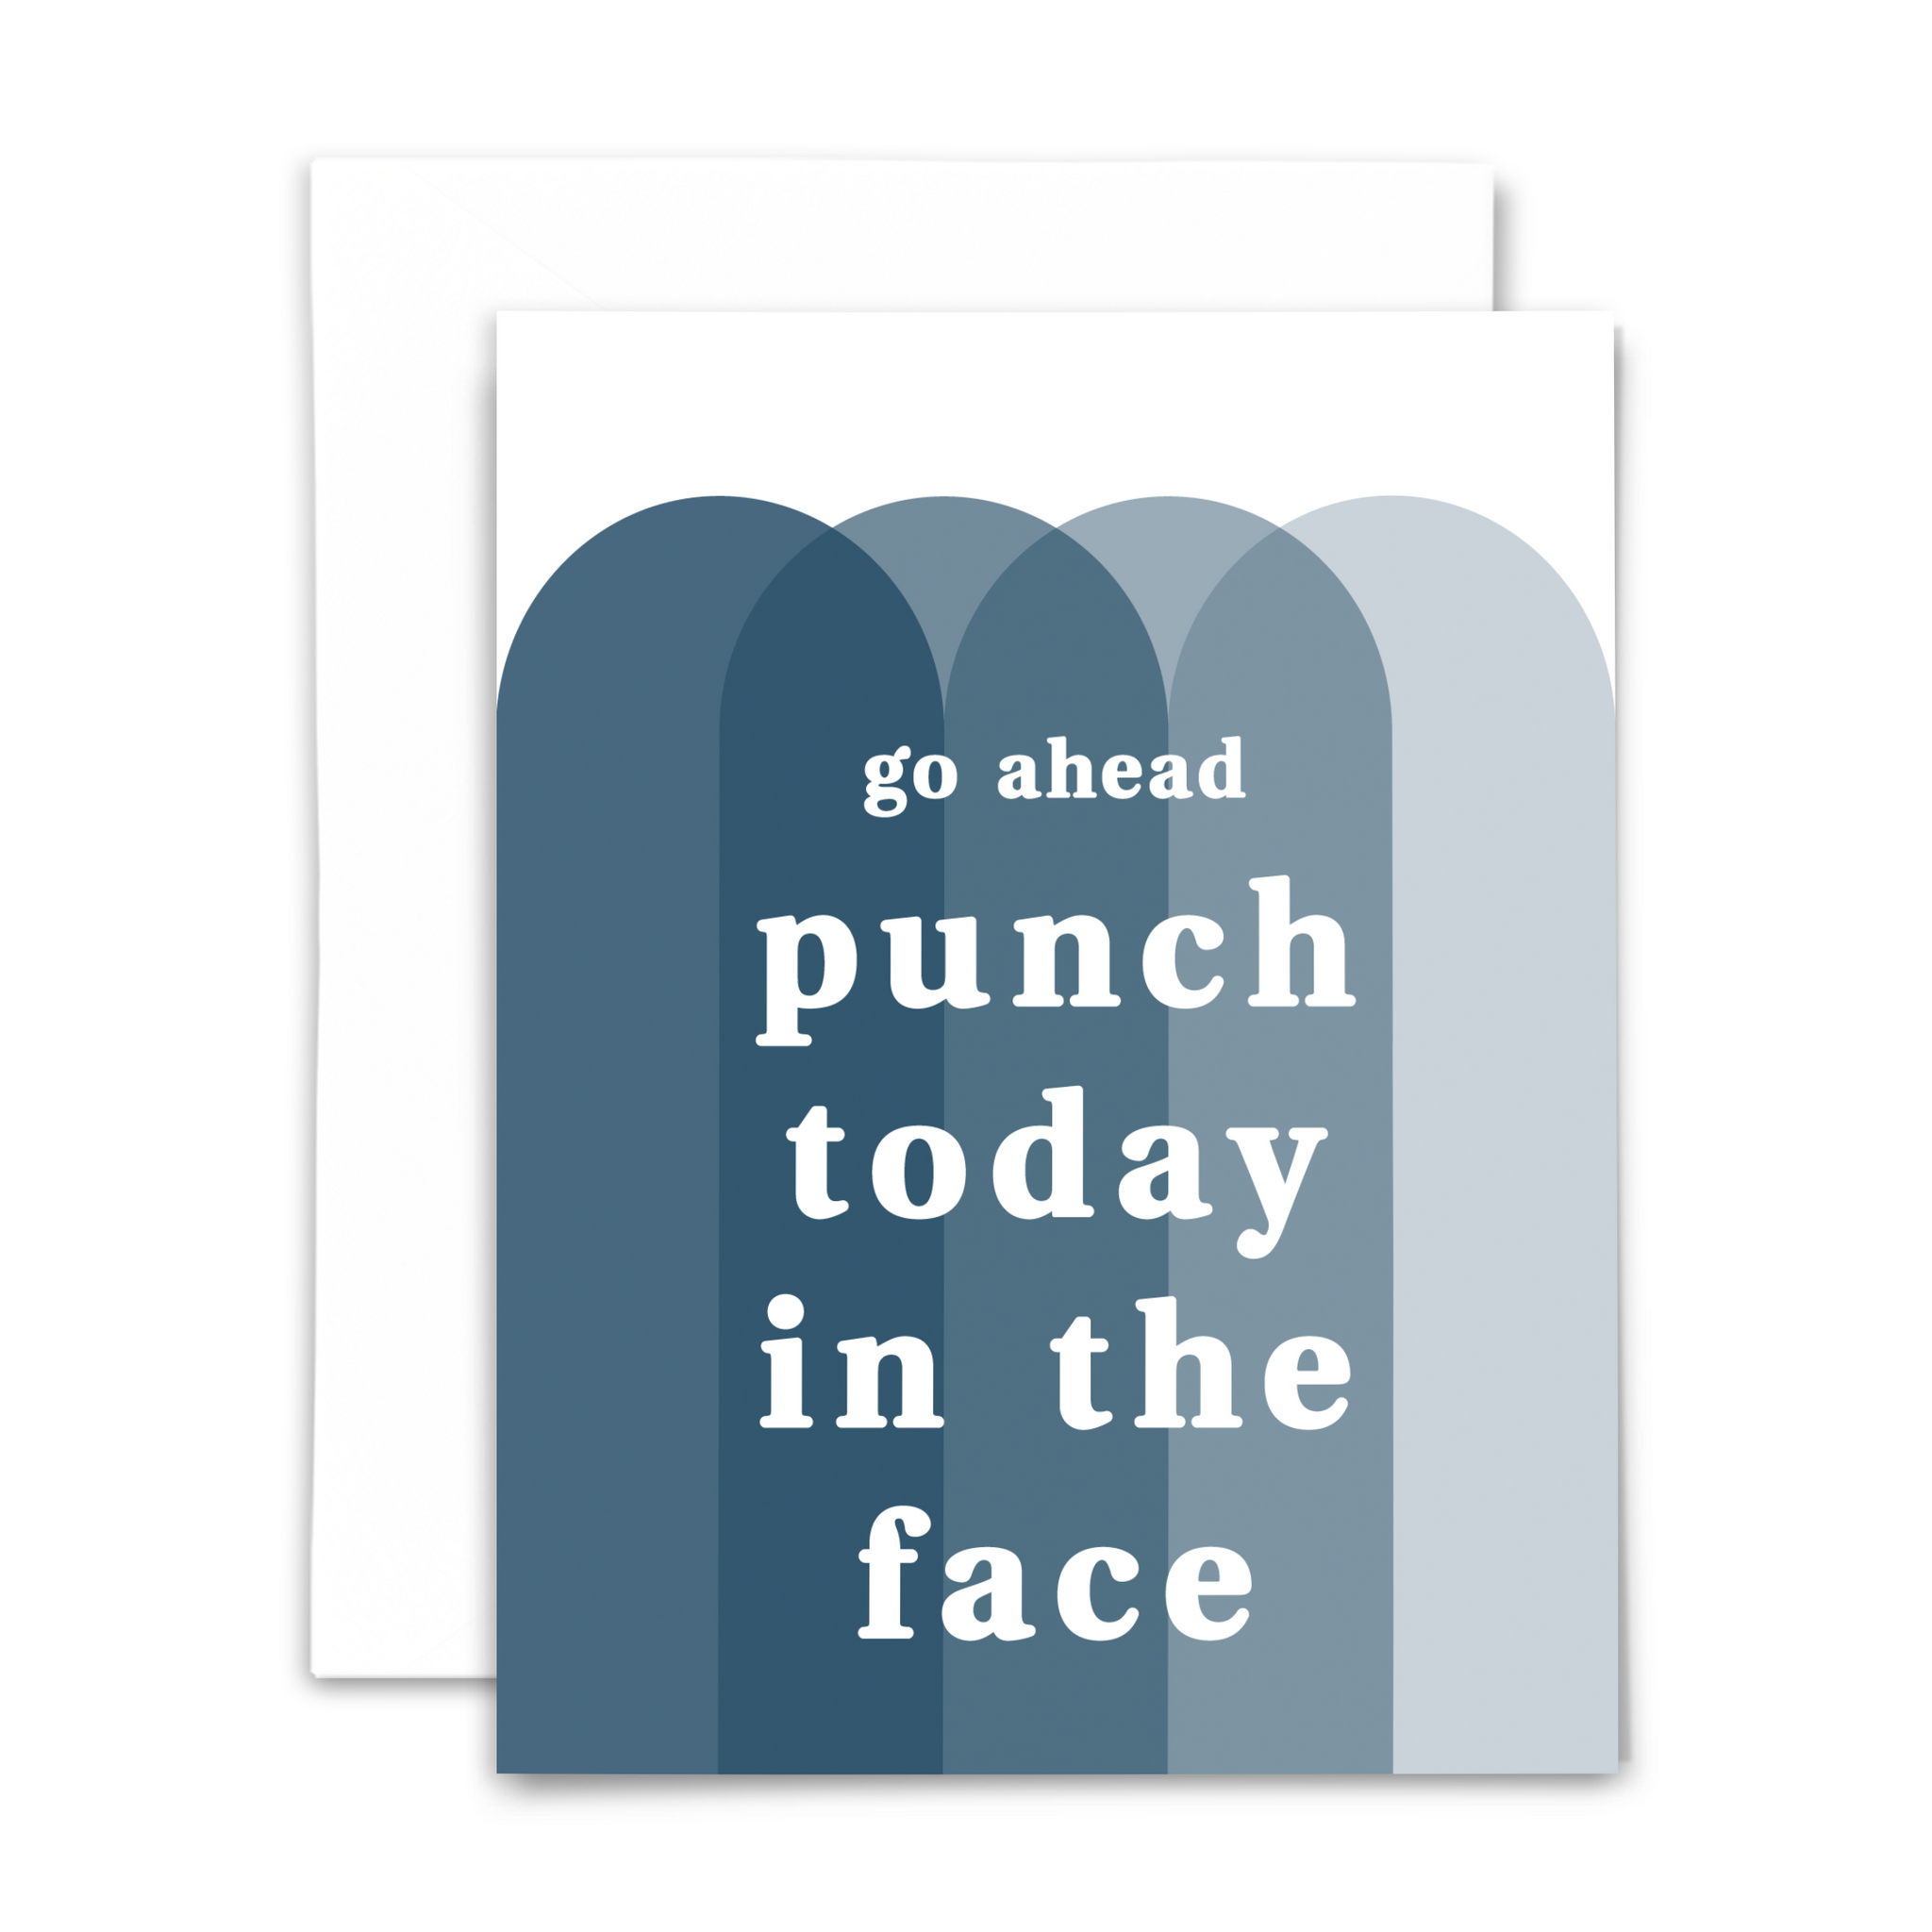 Inspirational blank greeting card "go ahead punch today in the face"; white font on backdrop of repeated blue arches with white envelope